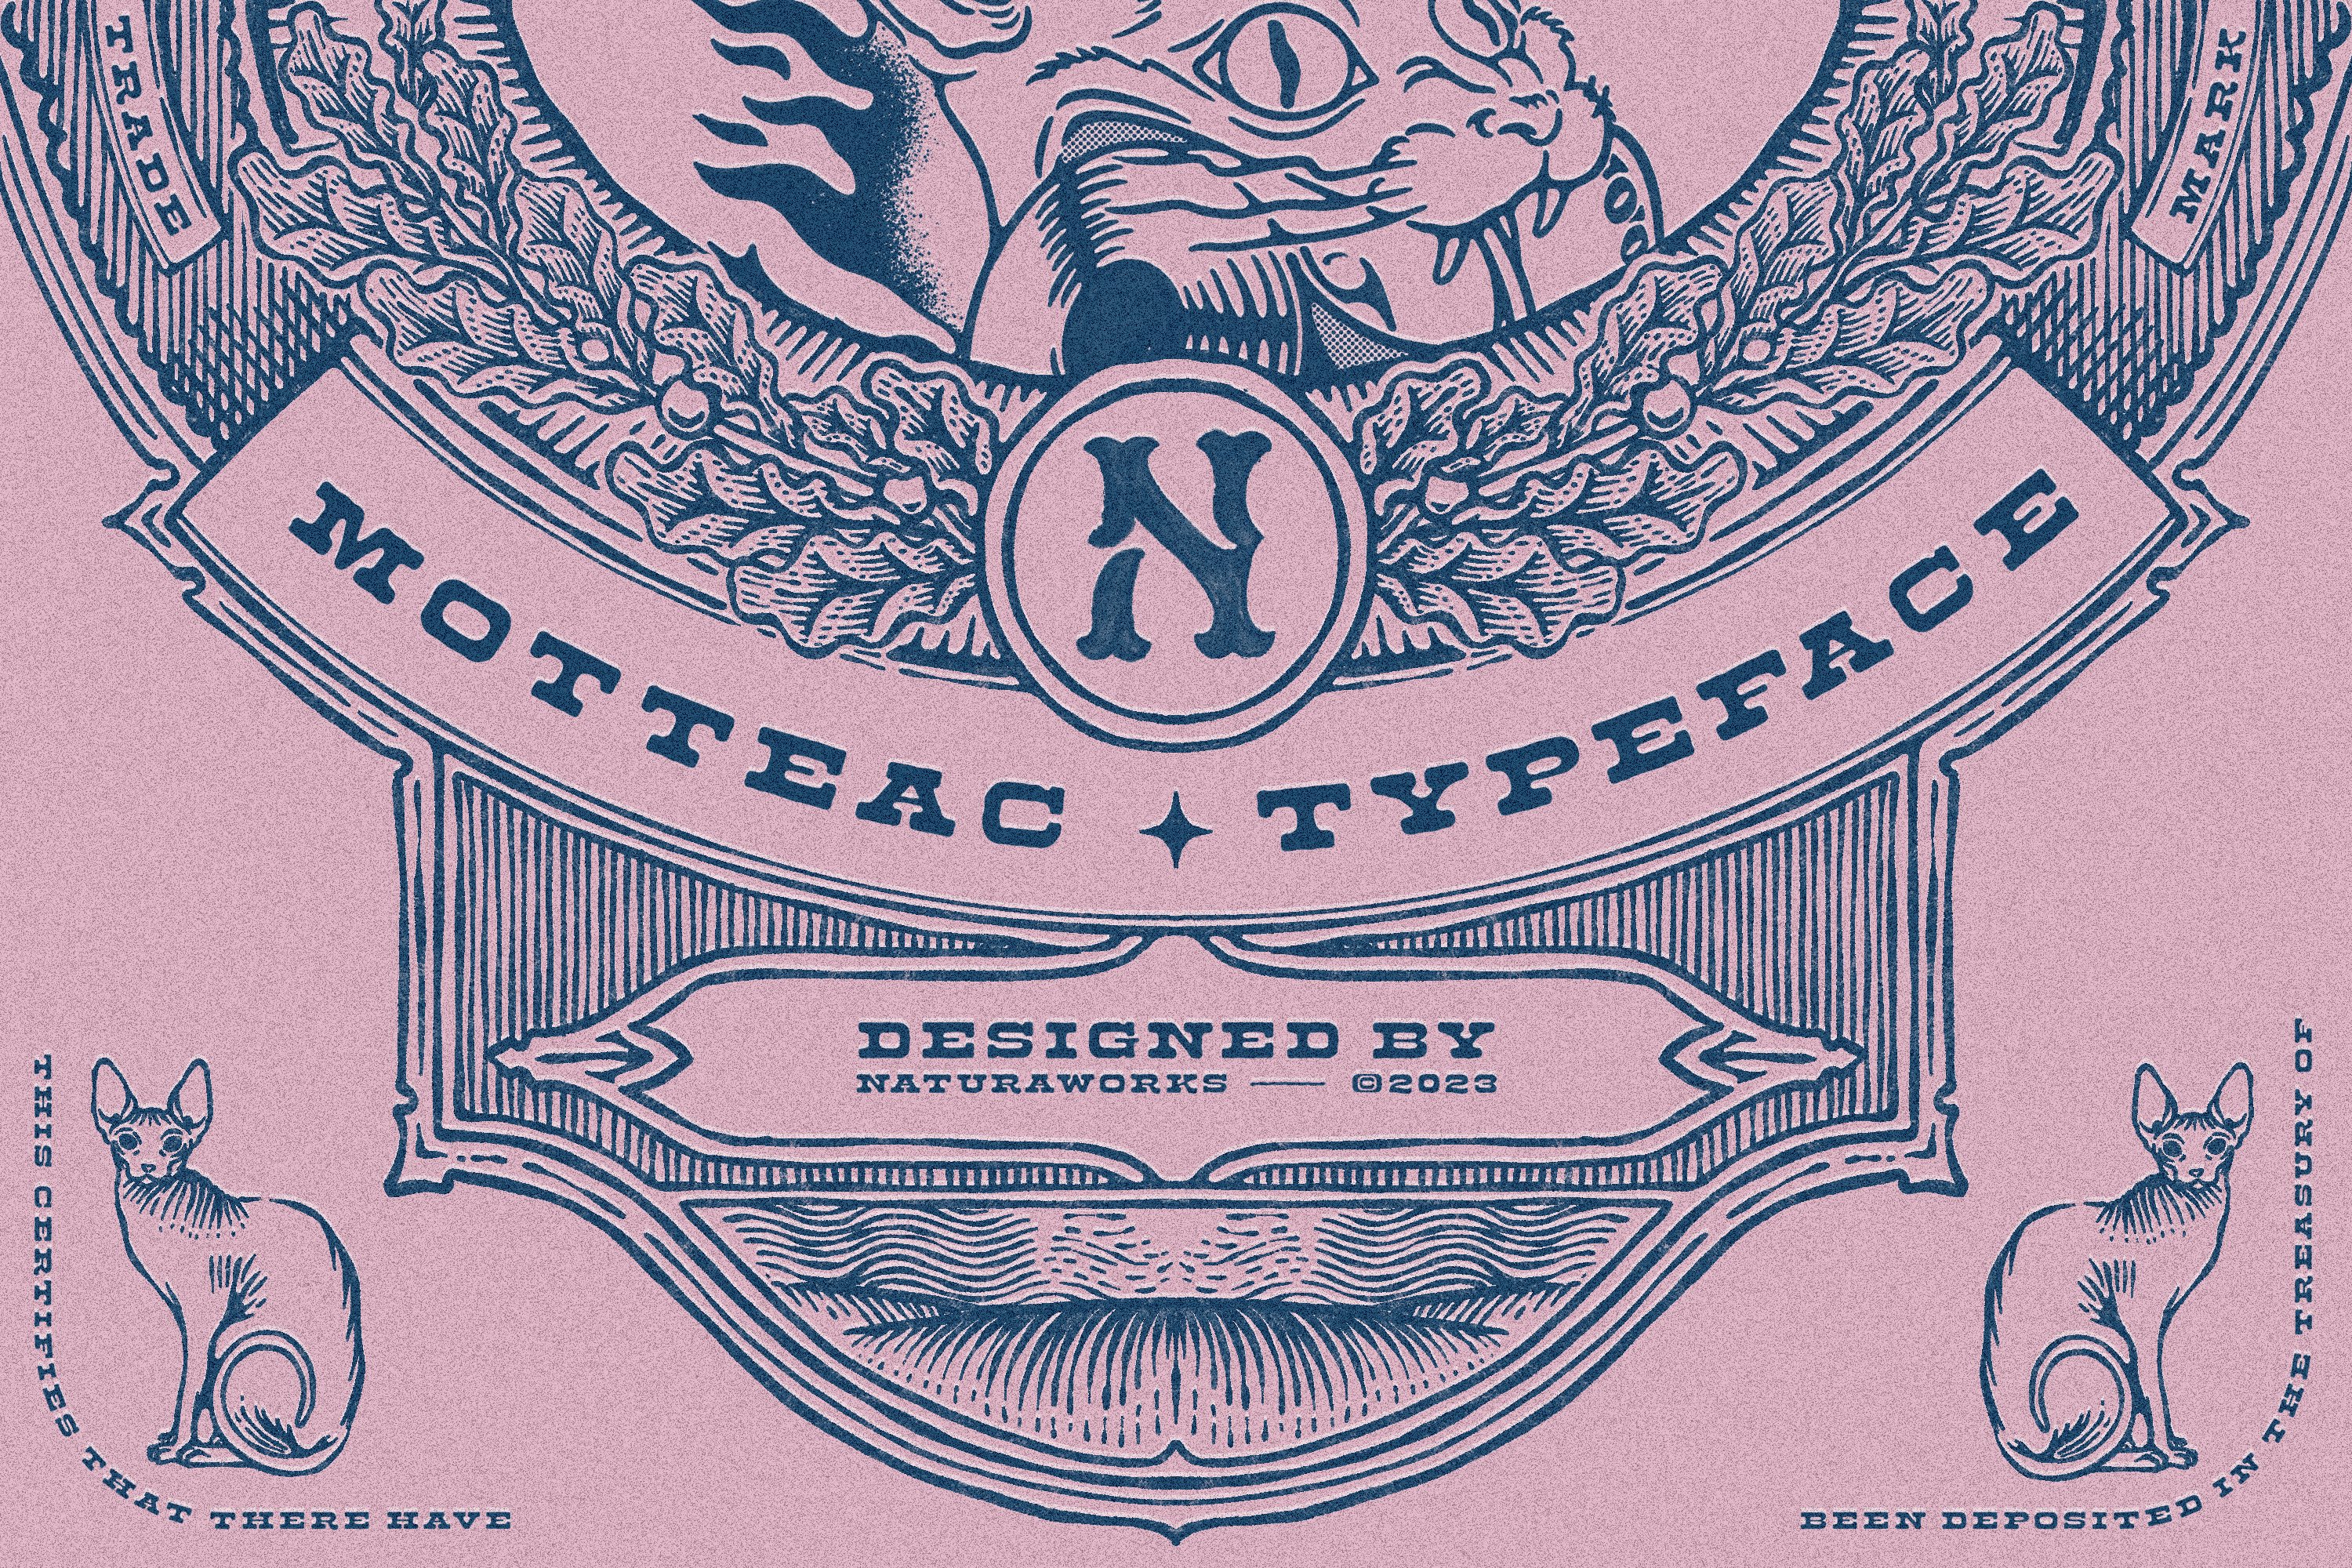 MOTTEAC DISPLAY TYPEFACE cover image.